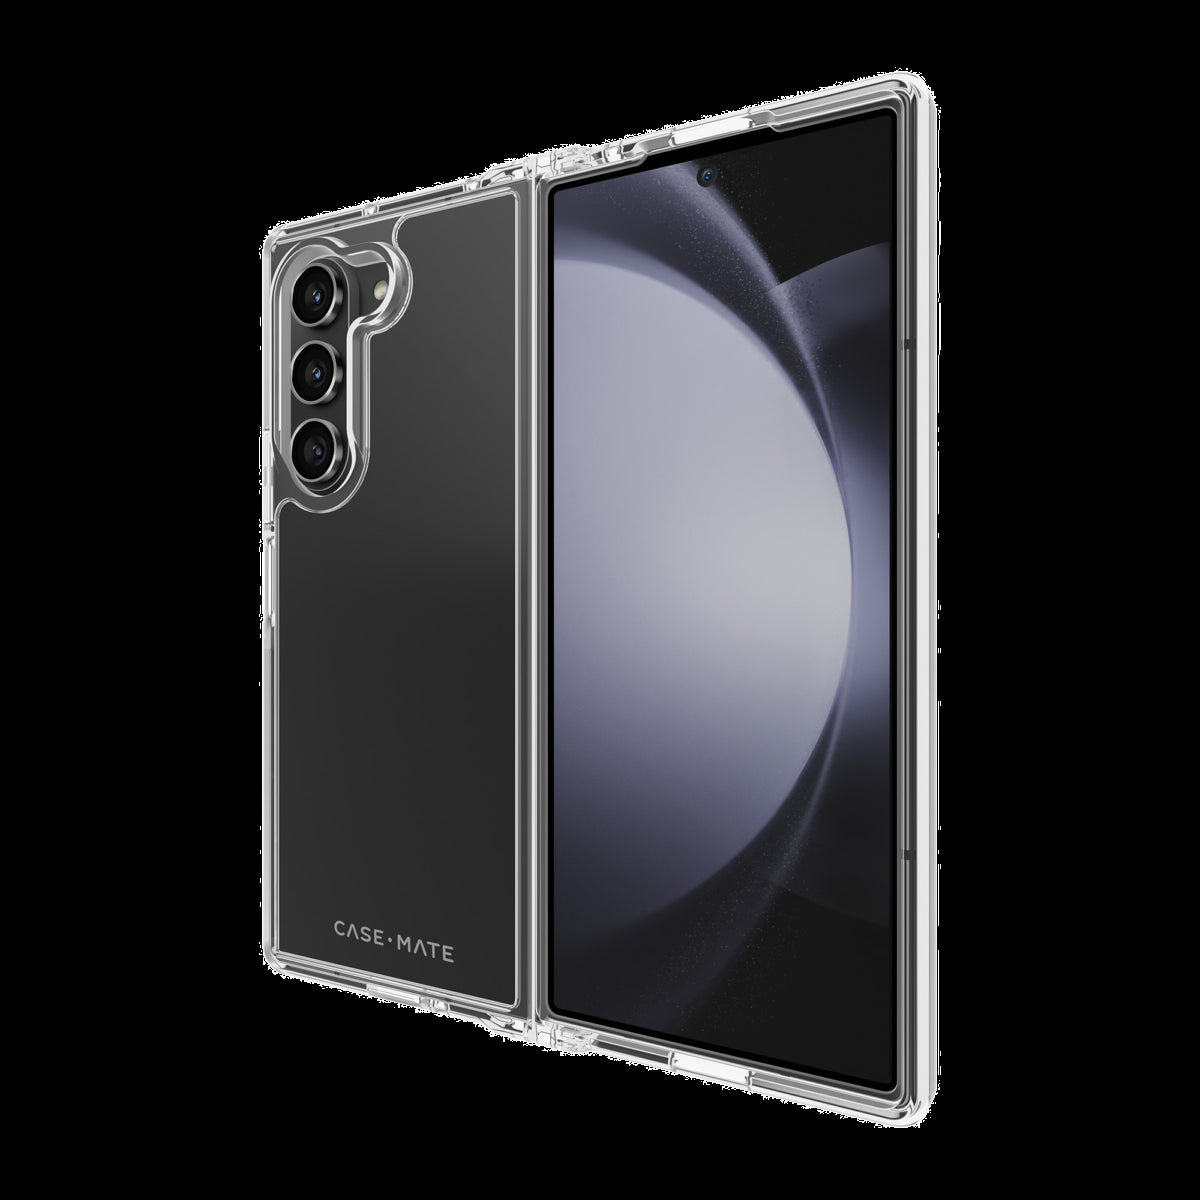 Designed with foldable devices in mind, the Case-Mate Tough Clear features 12-foot drop protection and a one-piece crystal clear design that will fit every occasion.